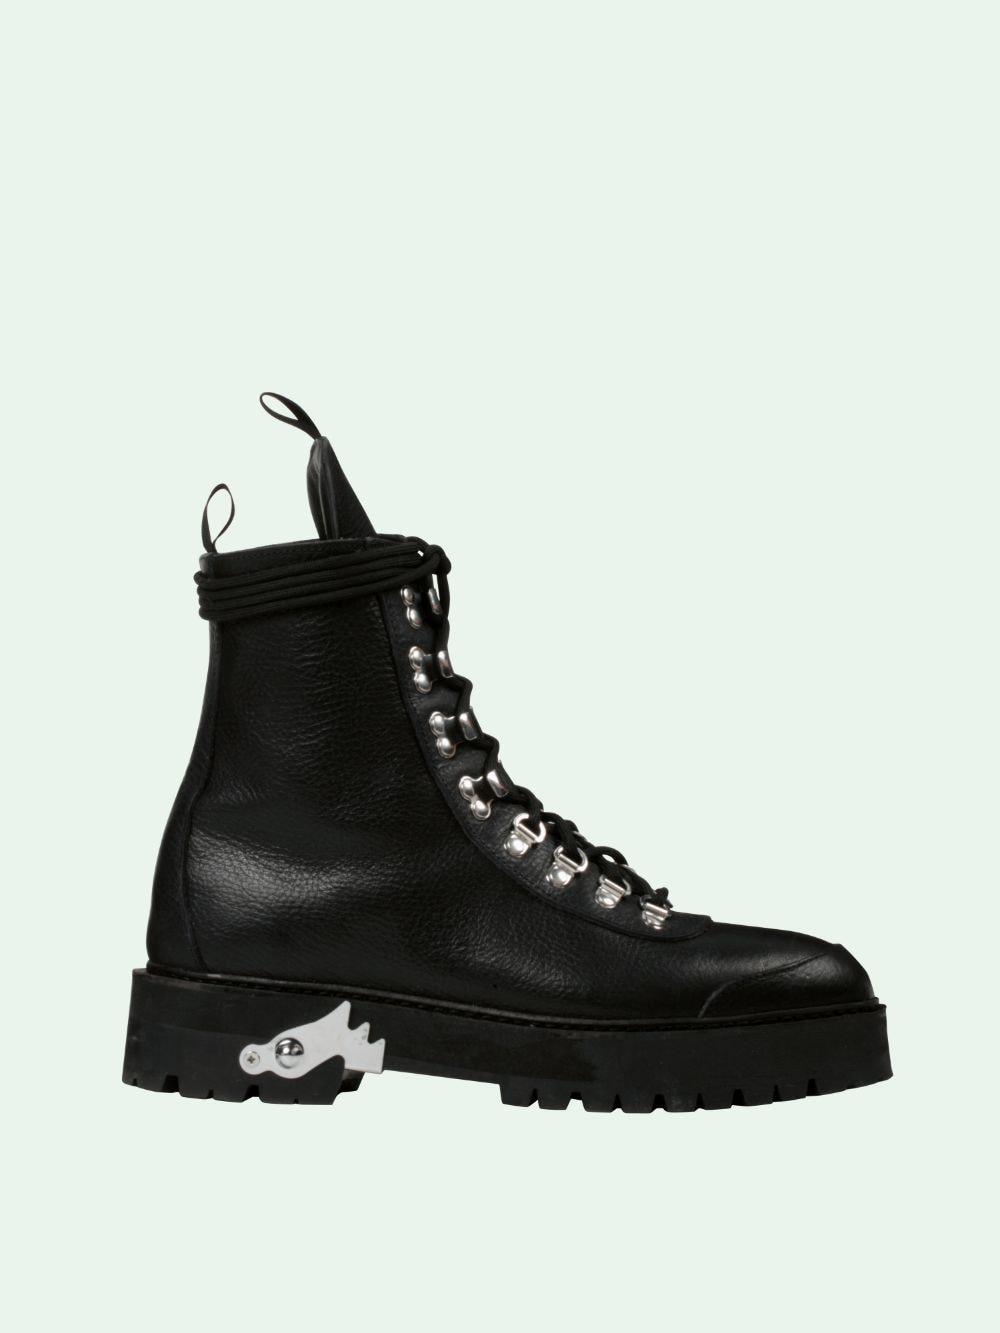 Off-White c/o Virgil Abloh Leather Ankle-high Hiking Boots in Black - Lyst